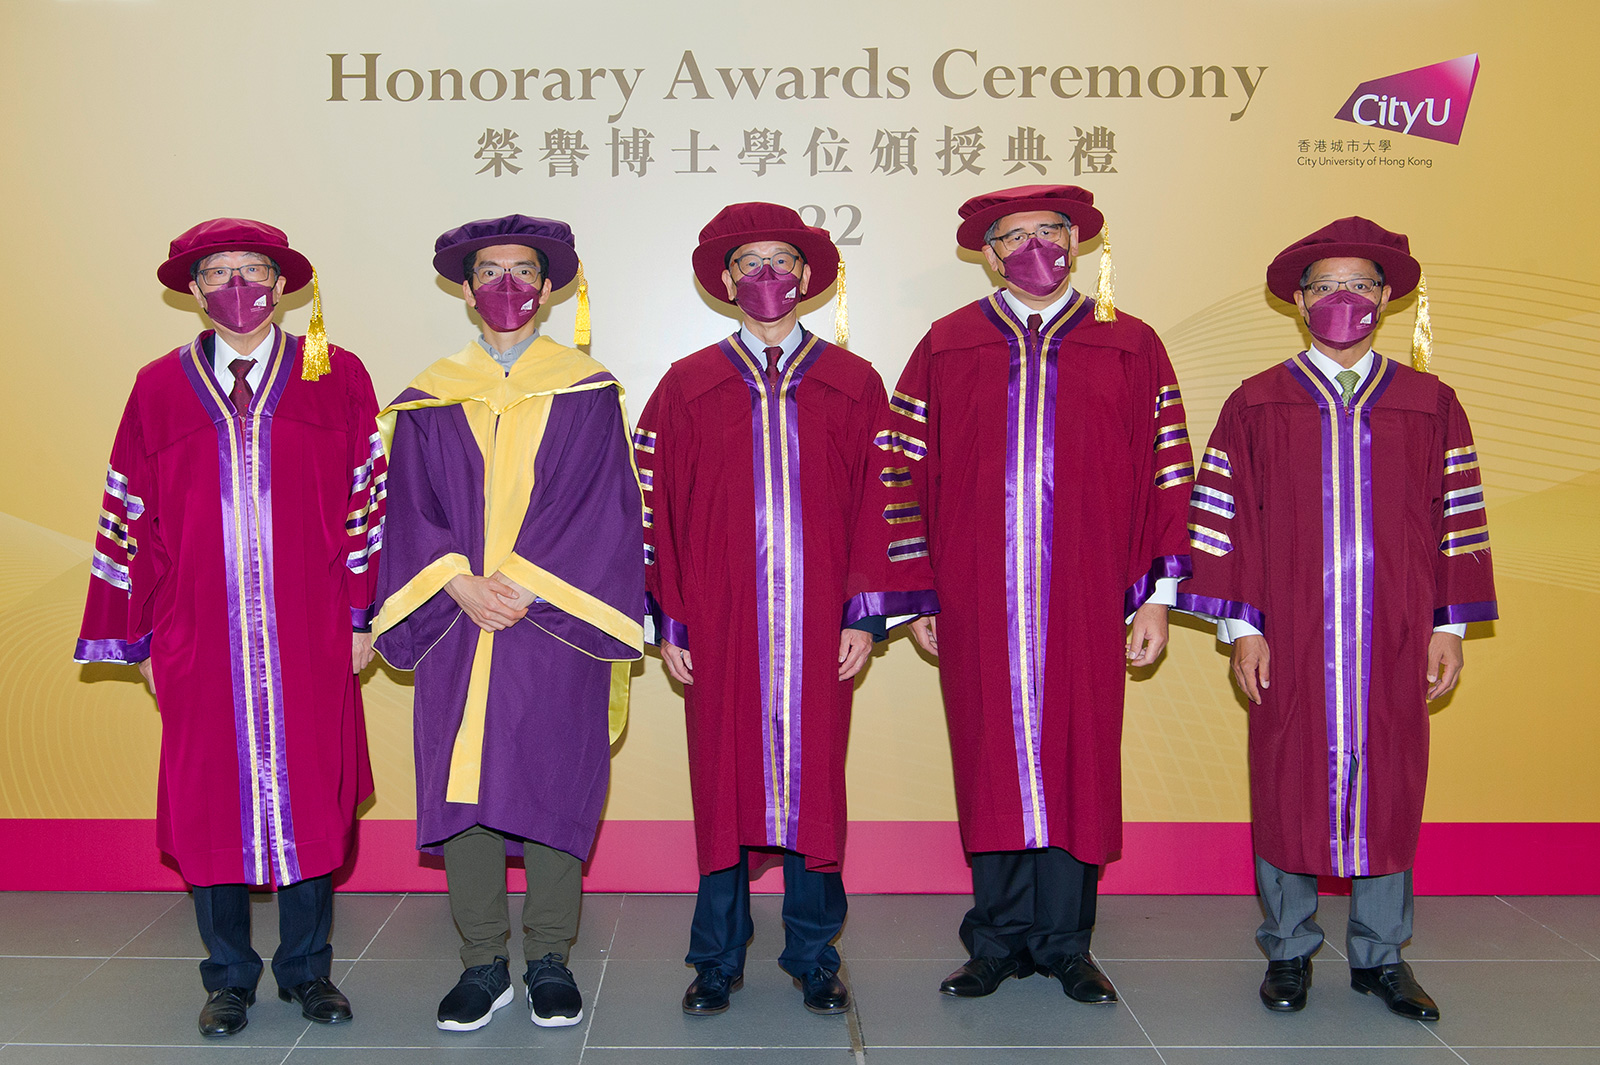 Two distinguished persons conferred honorary doctorates at CityU